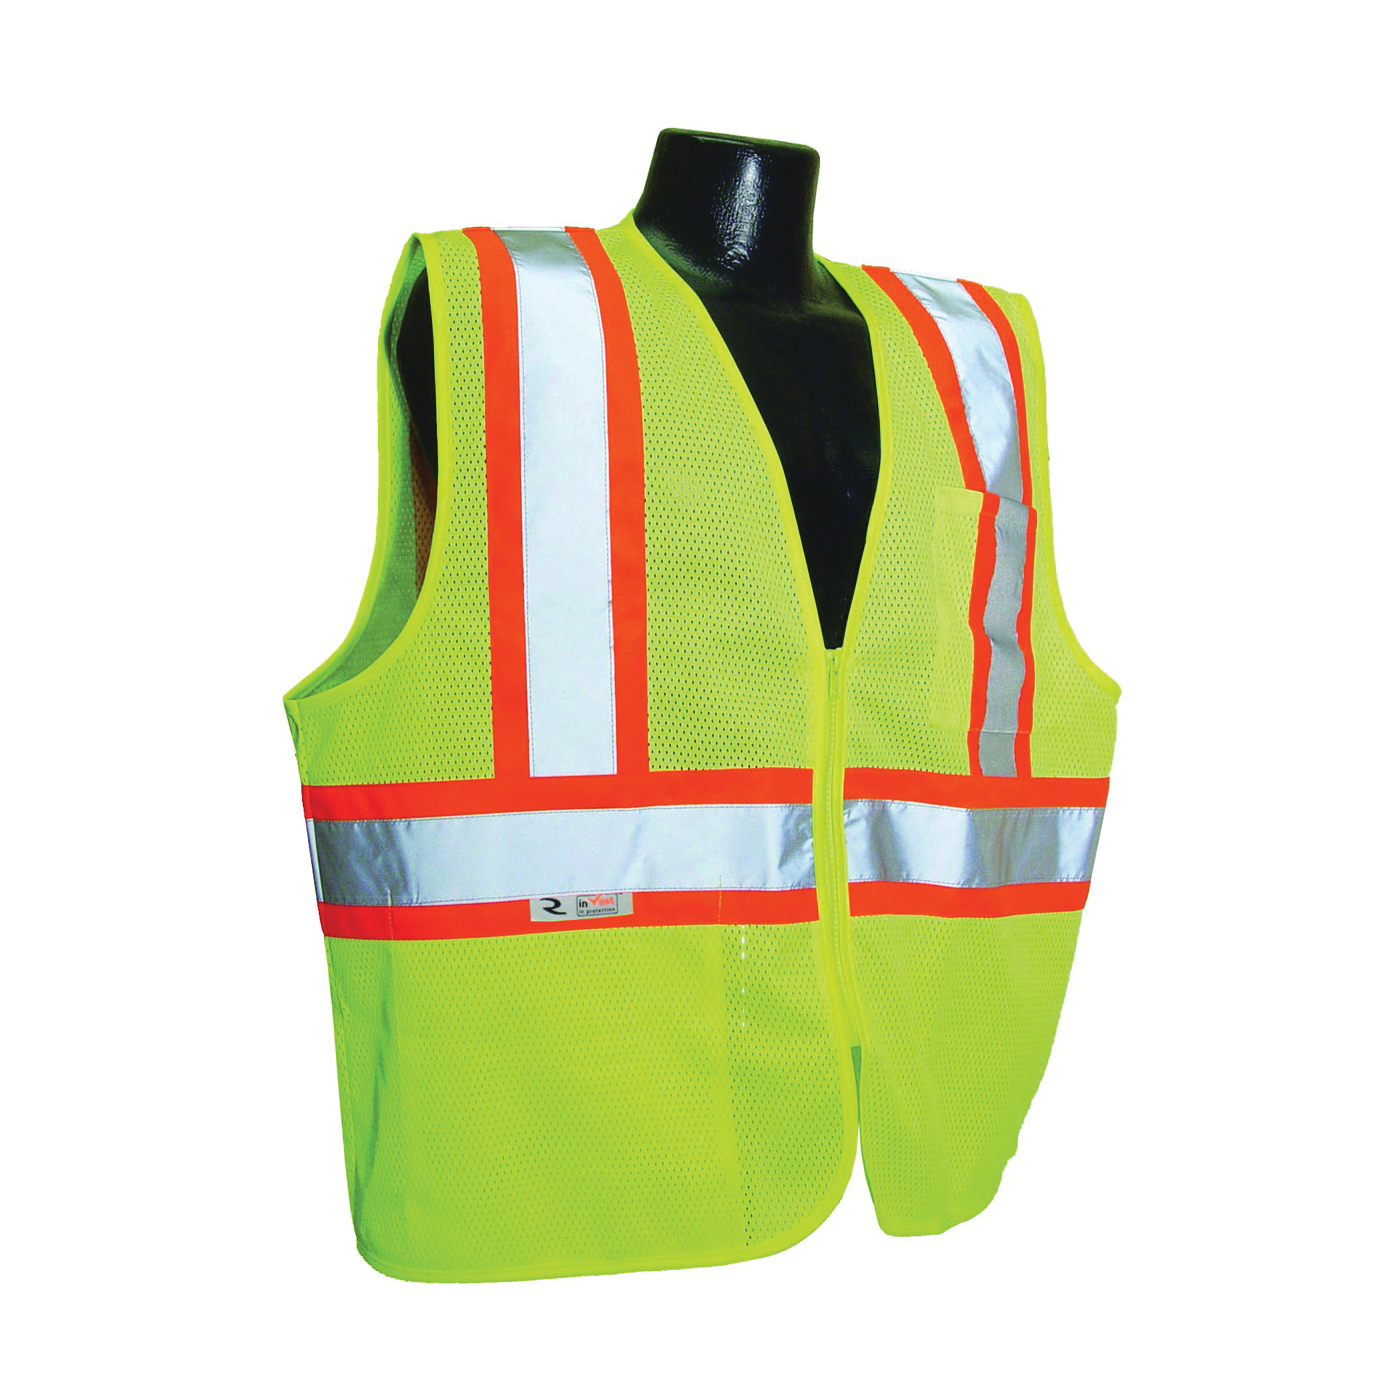 SV22-2ZGM-2X Economical Safety Vest, 2XL, Unisex, Fits to Chest Size: 30 in, Polyester, Green, Zipper Closure